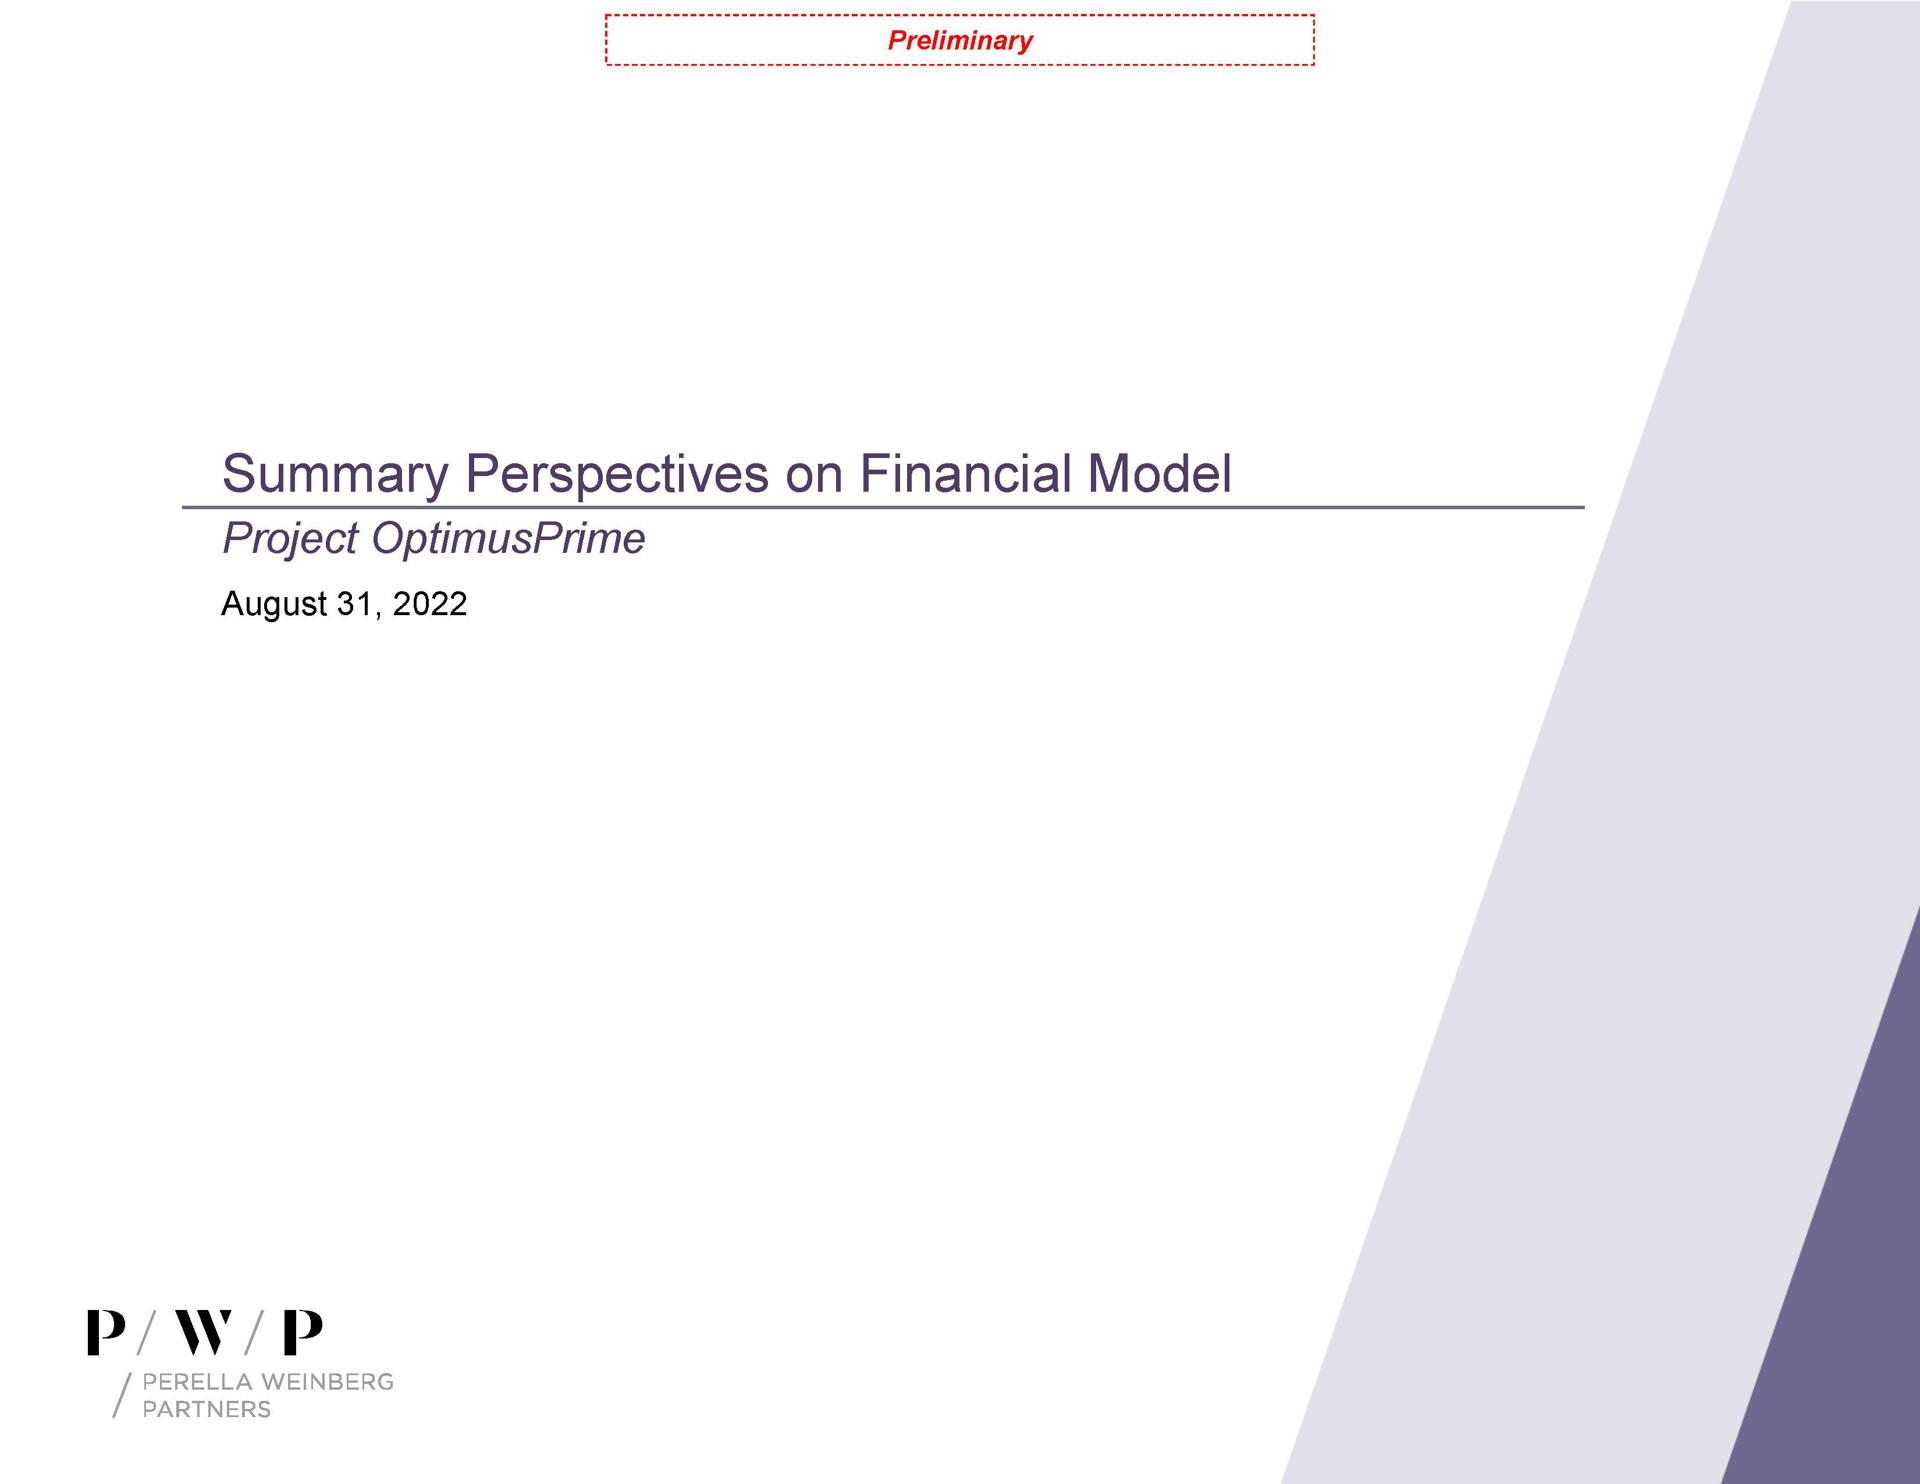 summary perspectives on financial model project | Perella Weinberg Partners